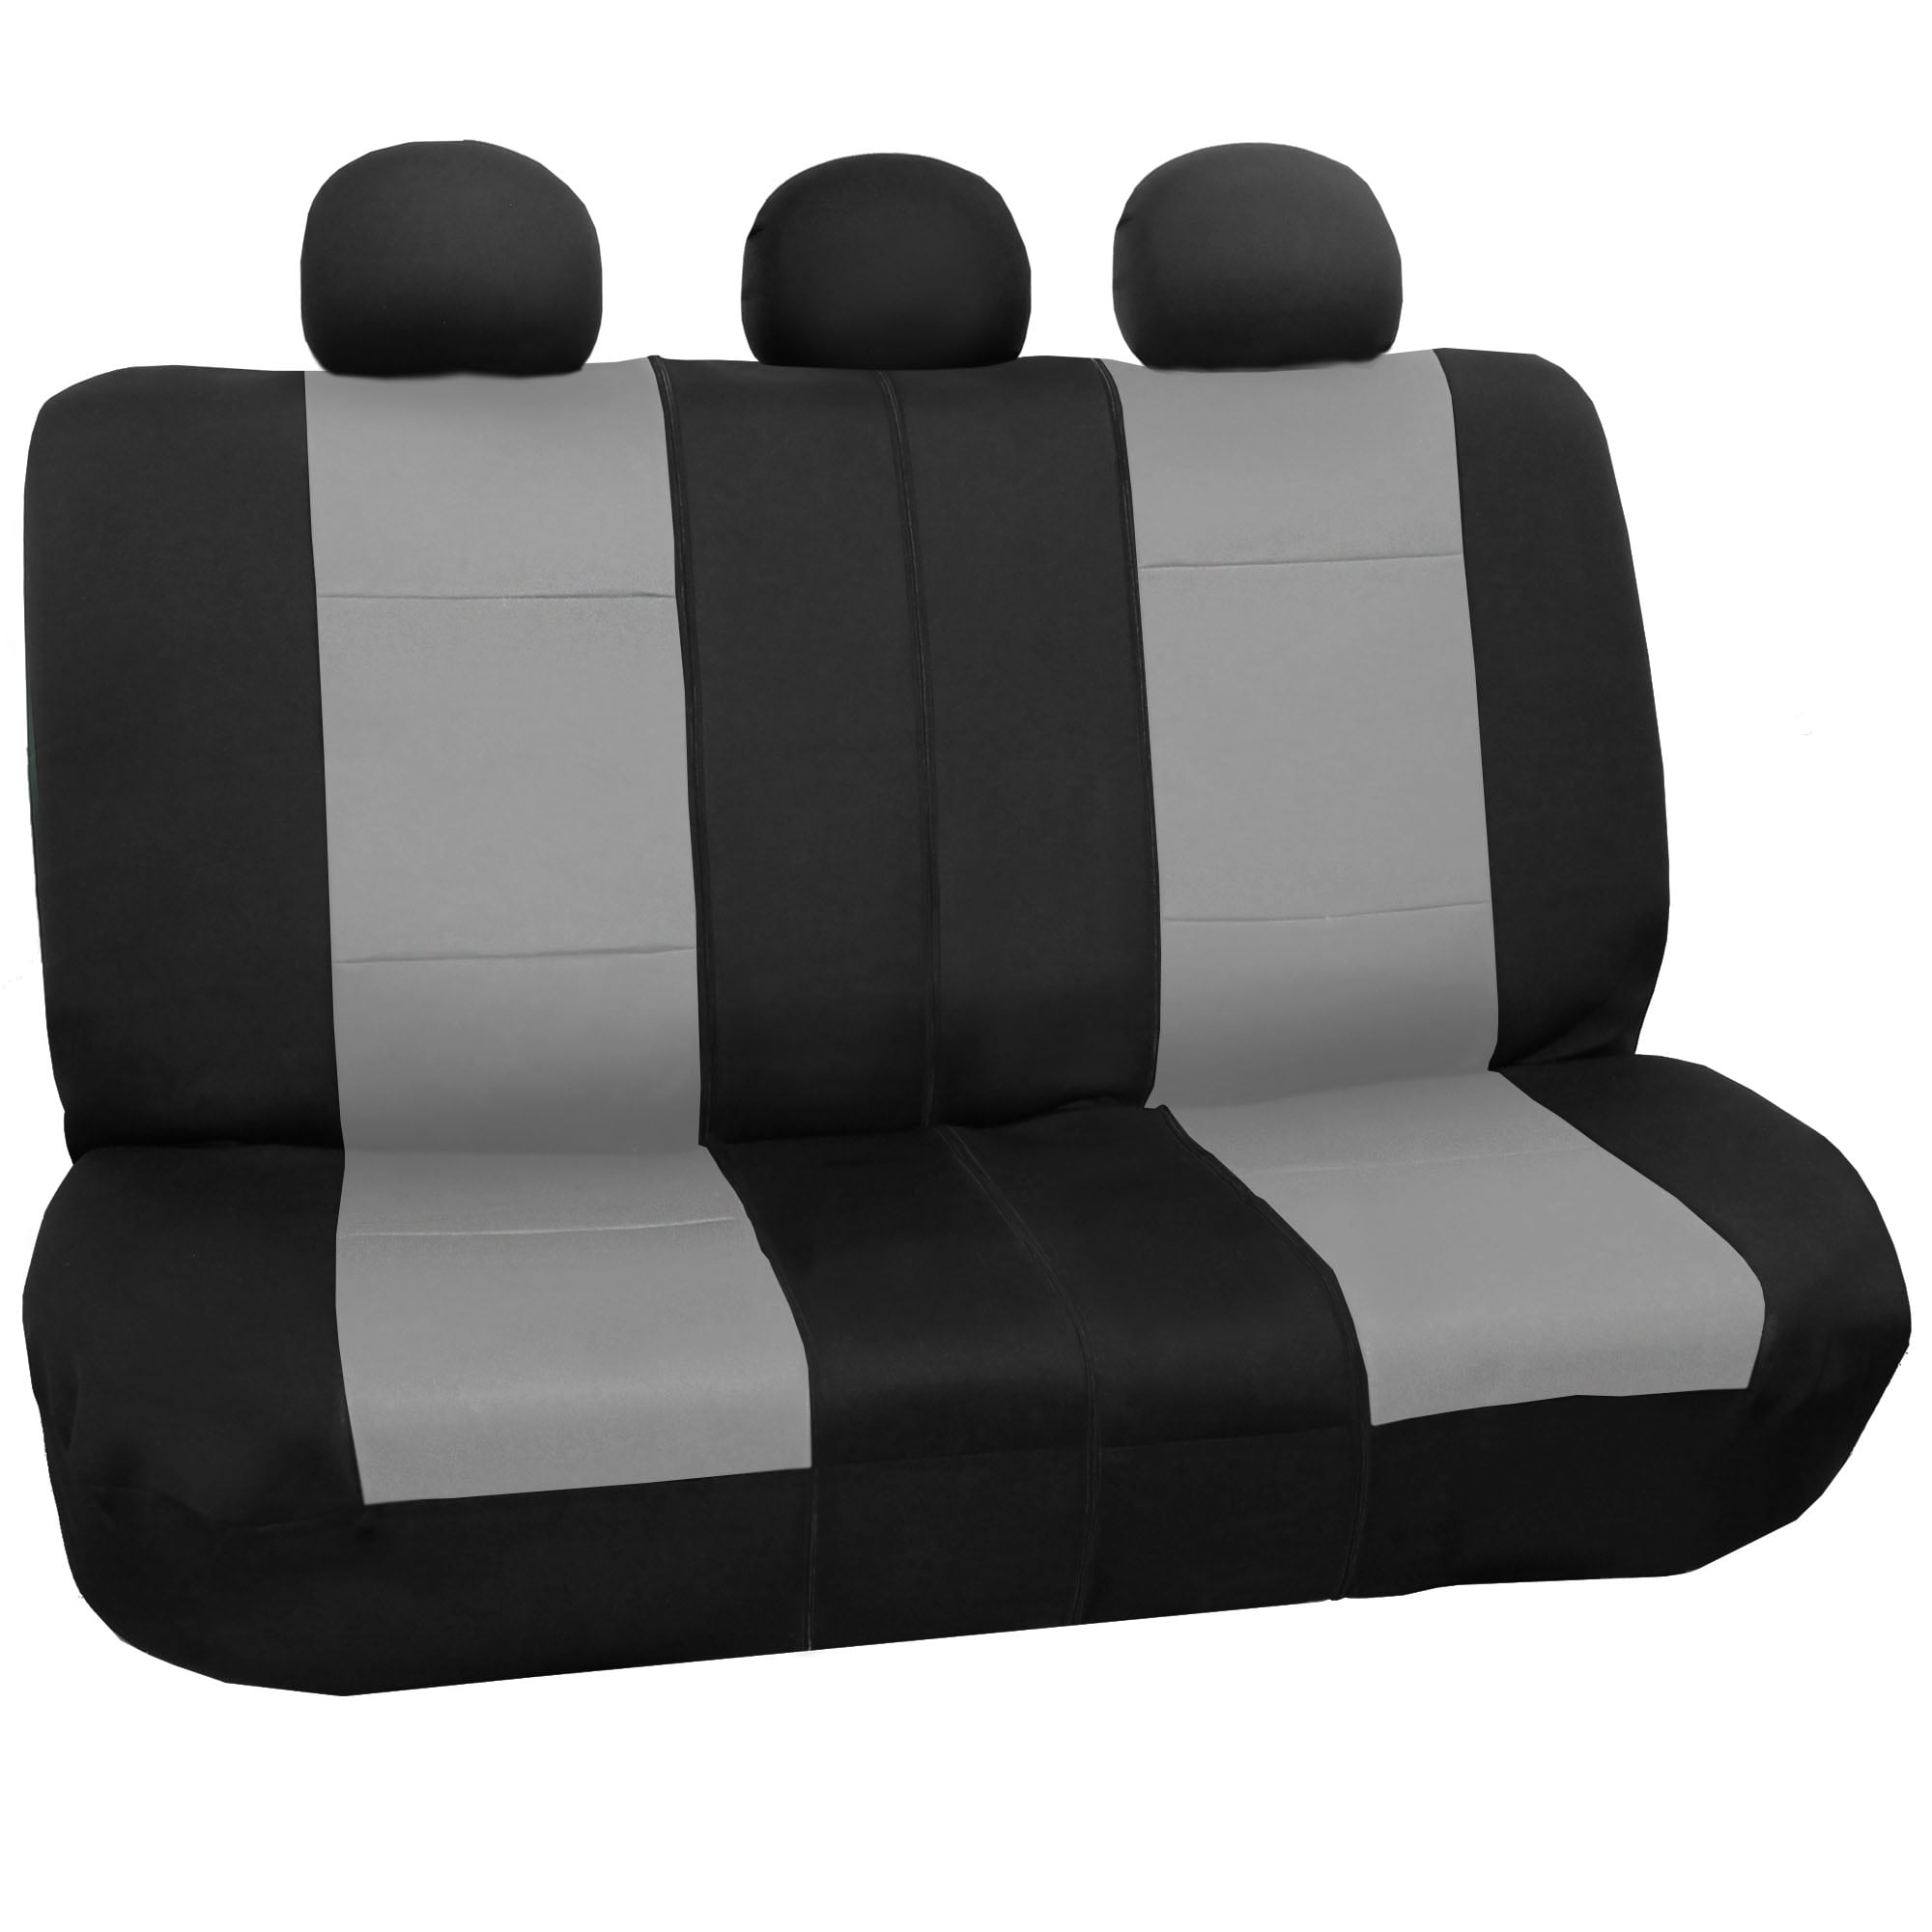 FH Group Neoprene Car Seat Cover, Universal Fit Gray Full Set Seat